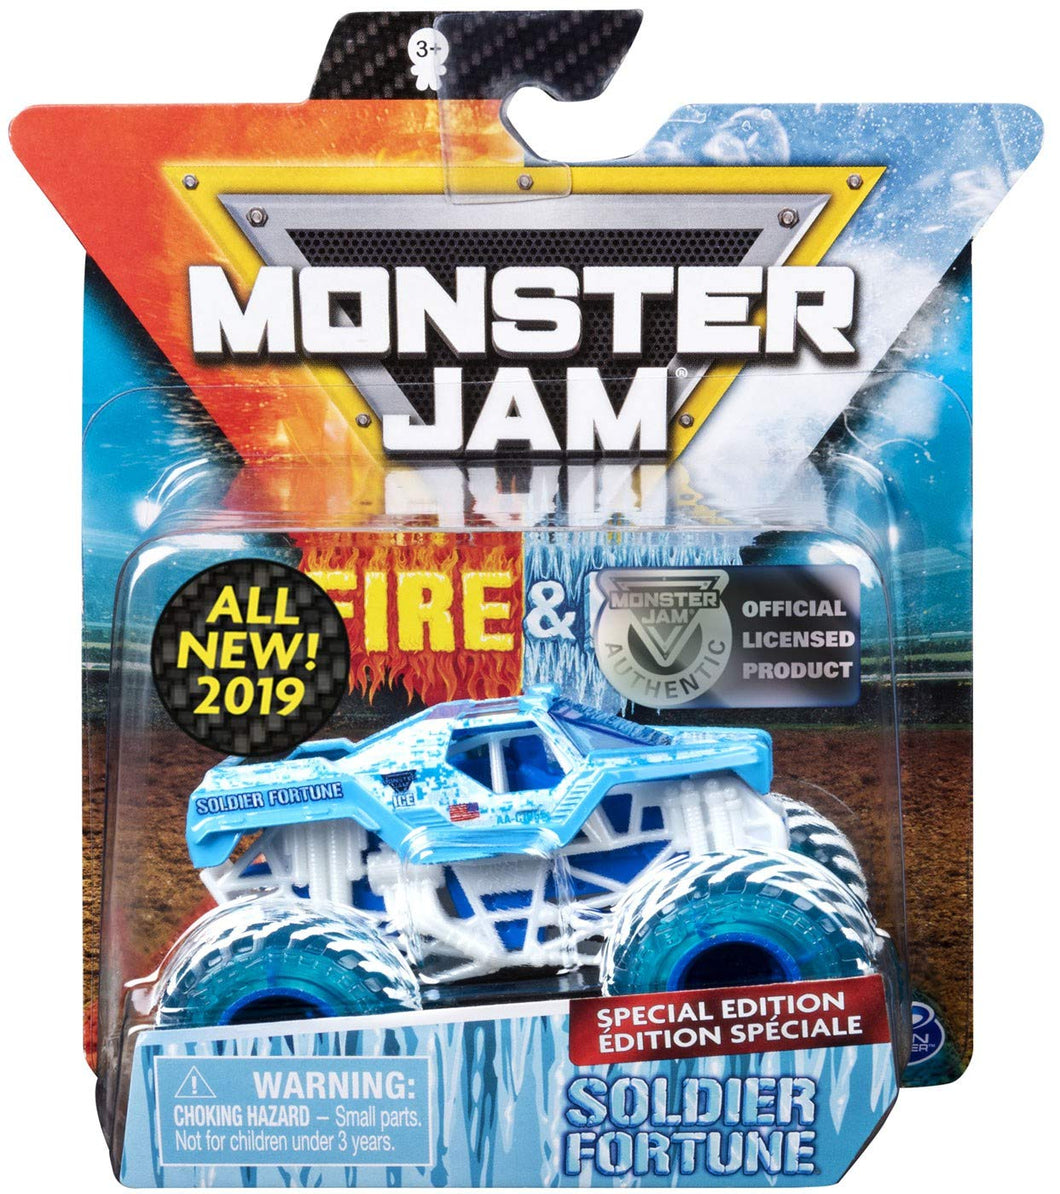 MJ 2019 Monster Jam Fire & Ice Soldier Fortune Special Edition 1:64 Scale